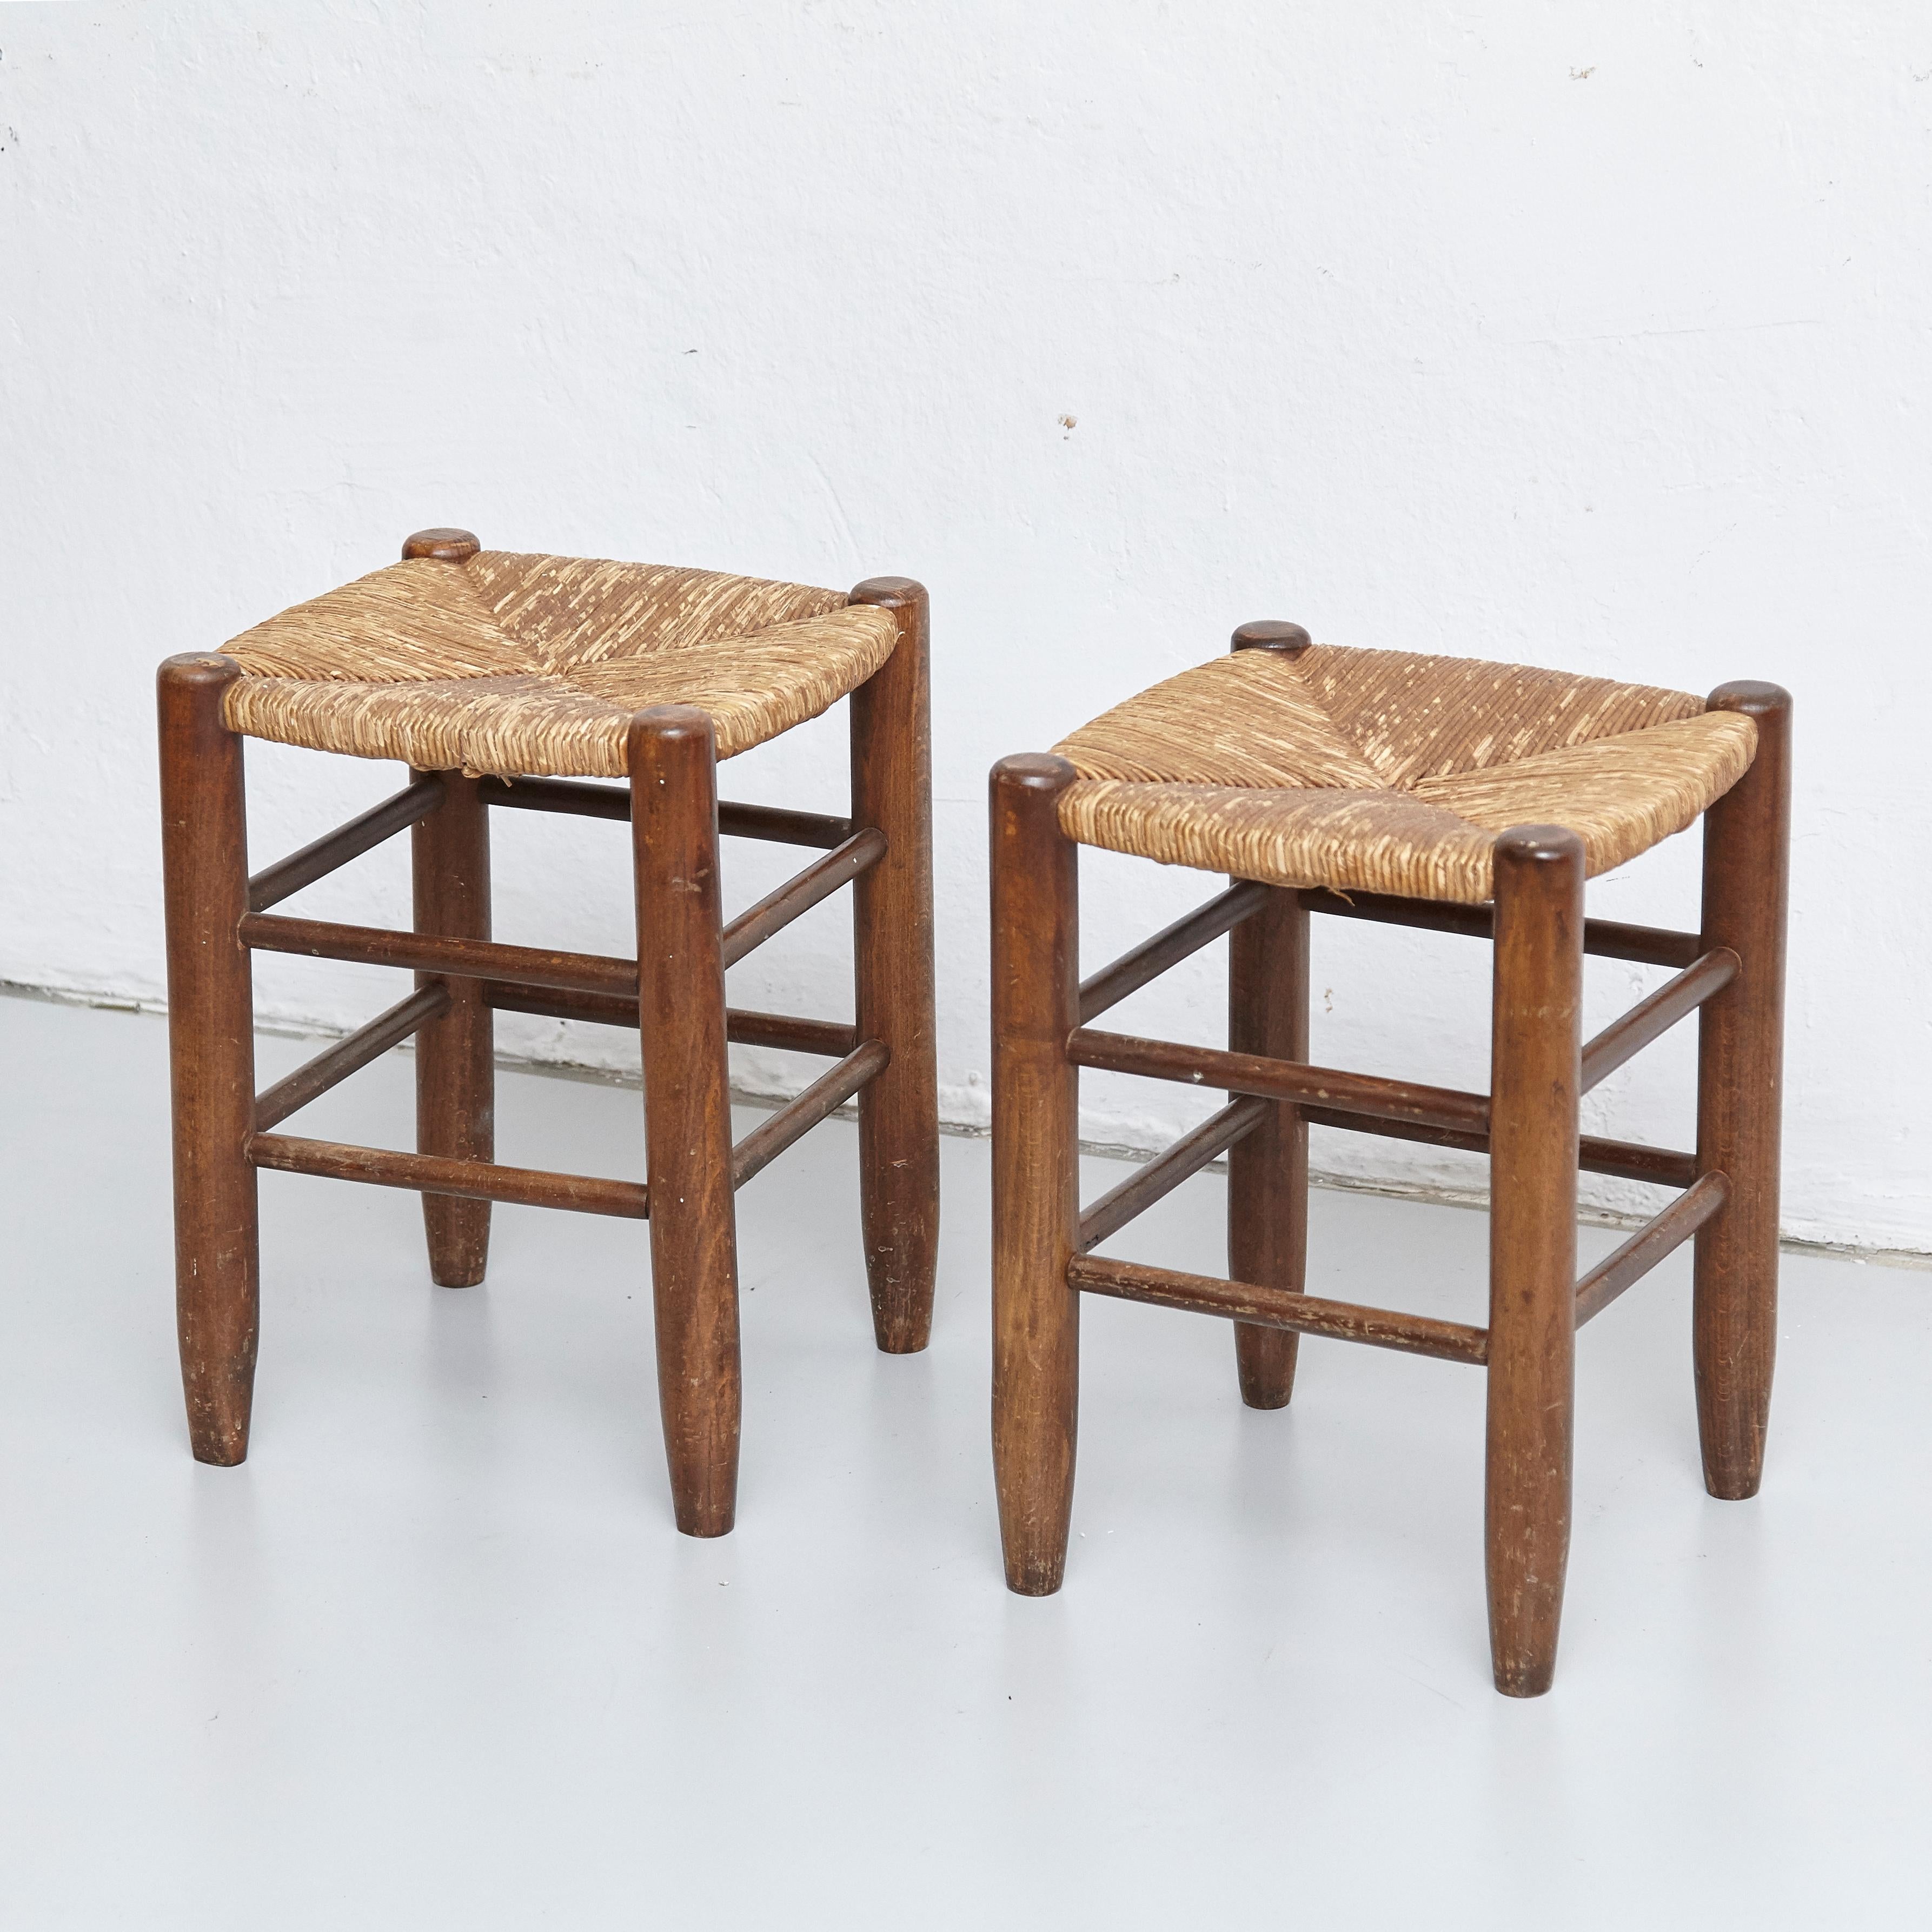 Mid-20th Century Pair of Charlotte Perriand, Mid-Century Modern, Rattan Wood French Stools